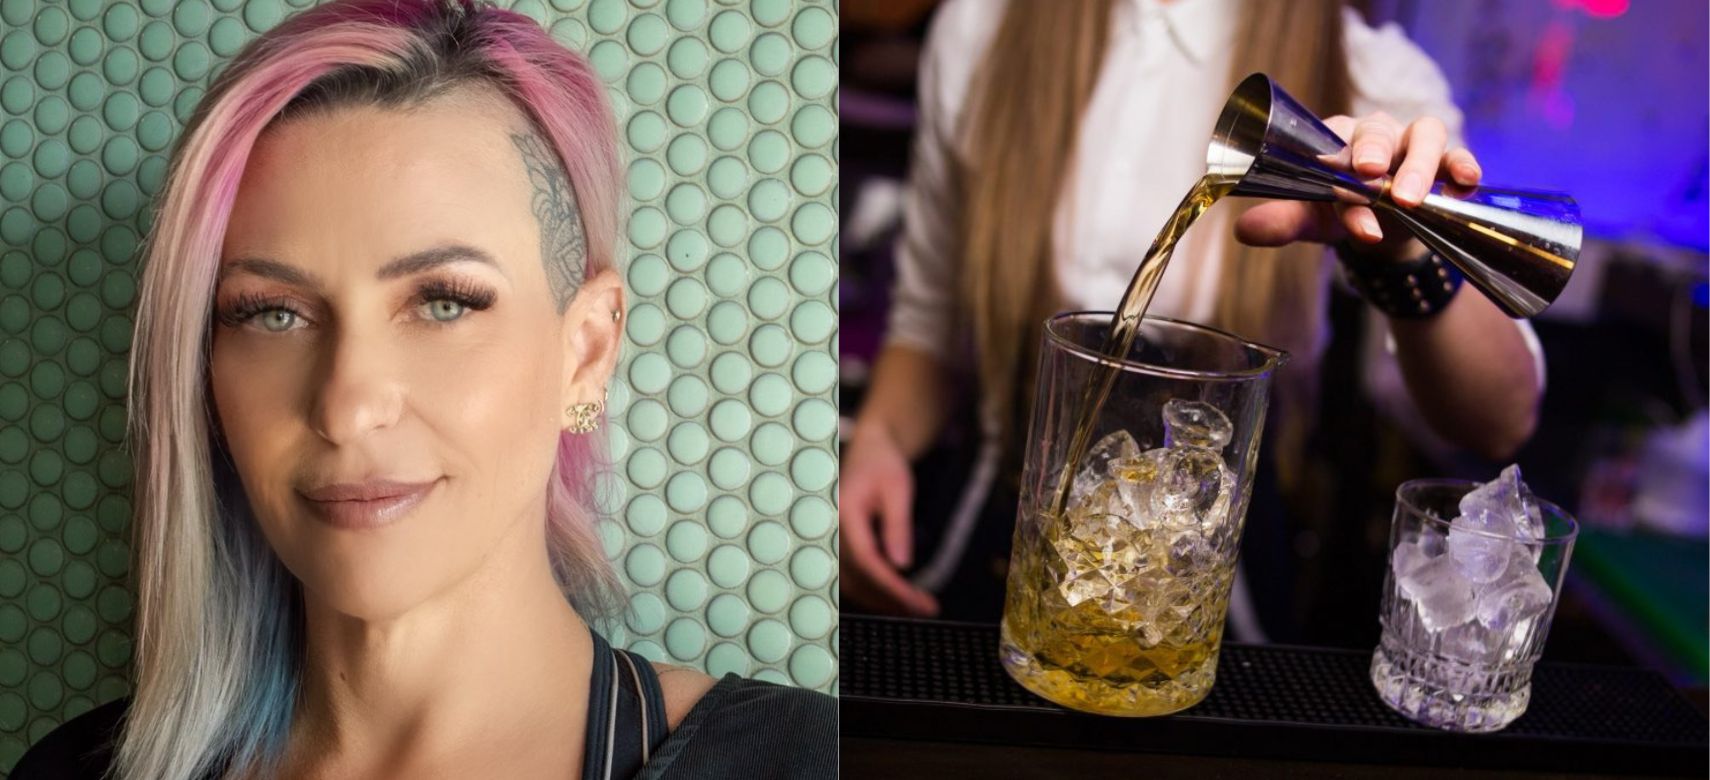 Photo for: Kate Gerwin from Netflix's Show Drinks Master’s Joins Bartenders Spirits Awards As A Judge